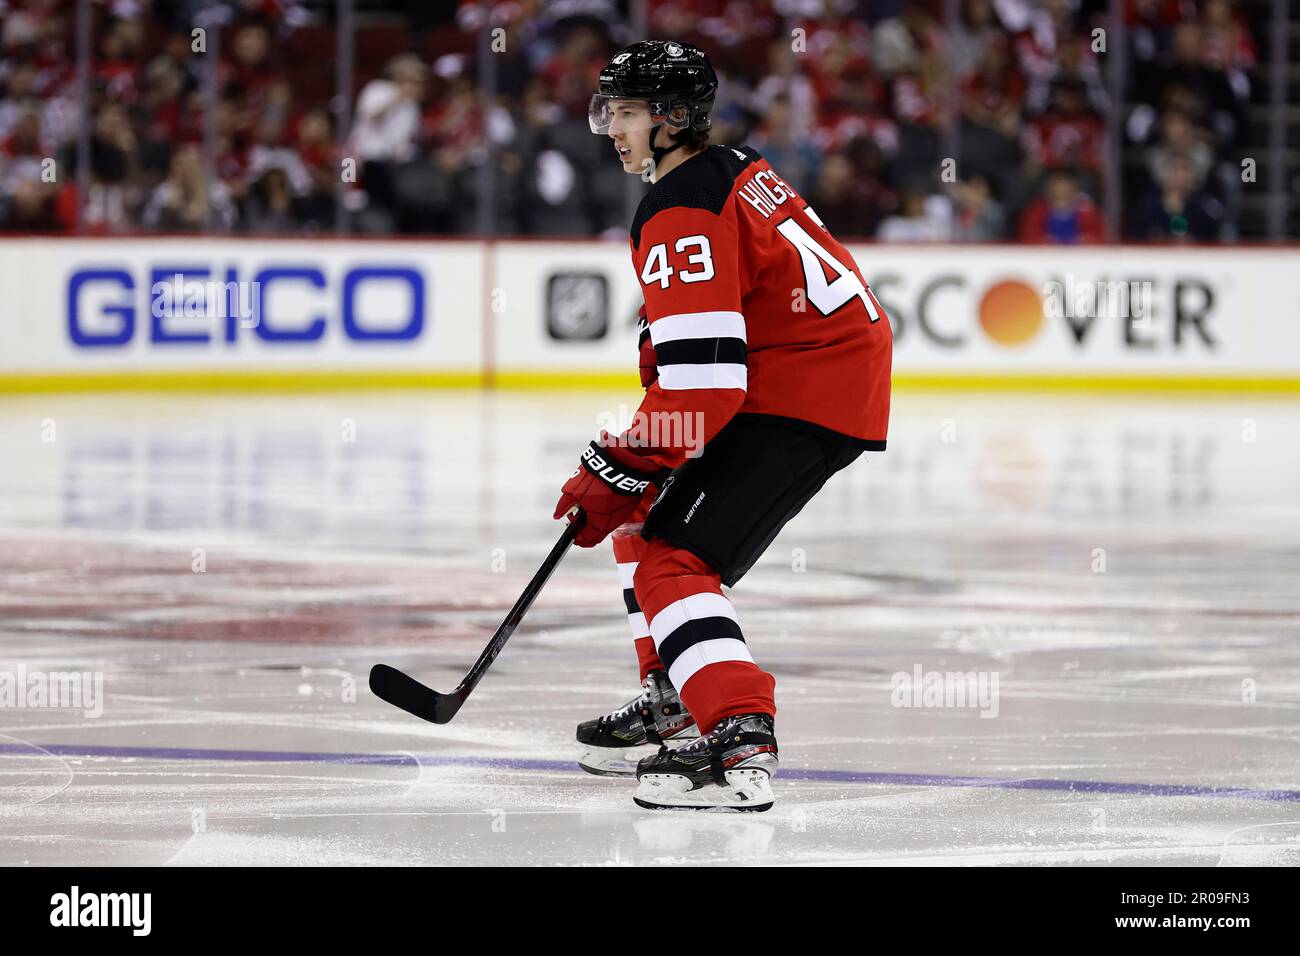 Luke Hughes Scores Stunning Overtime Winner as New Jersey Devils Defeat  Washington Capitals, 5-4 - All About The Jersey